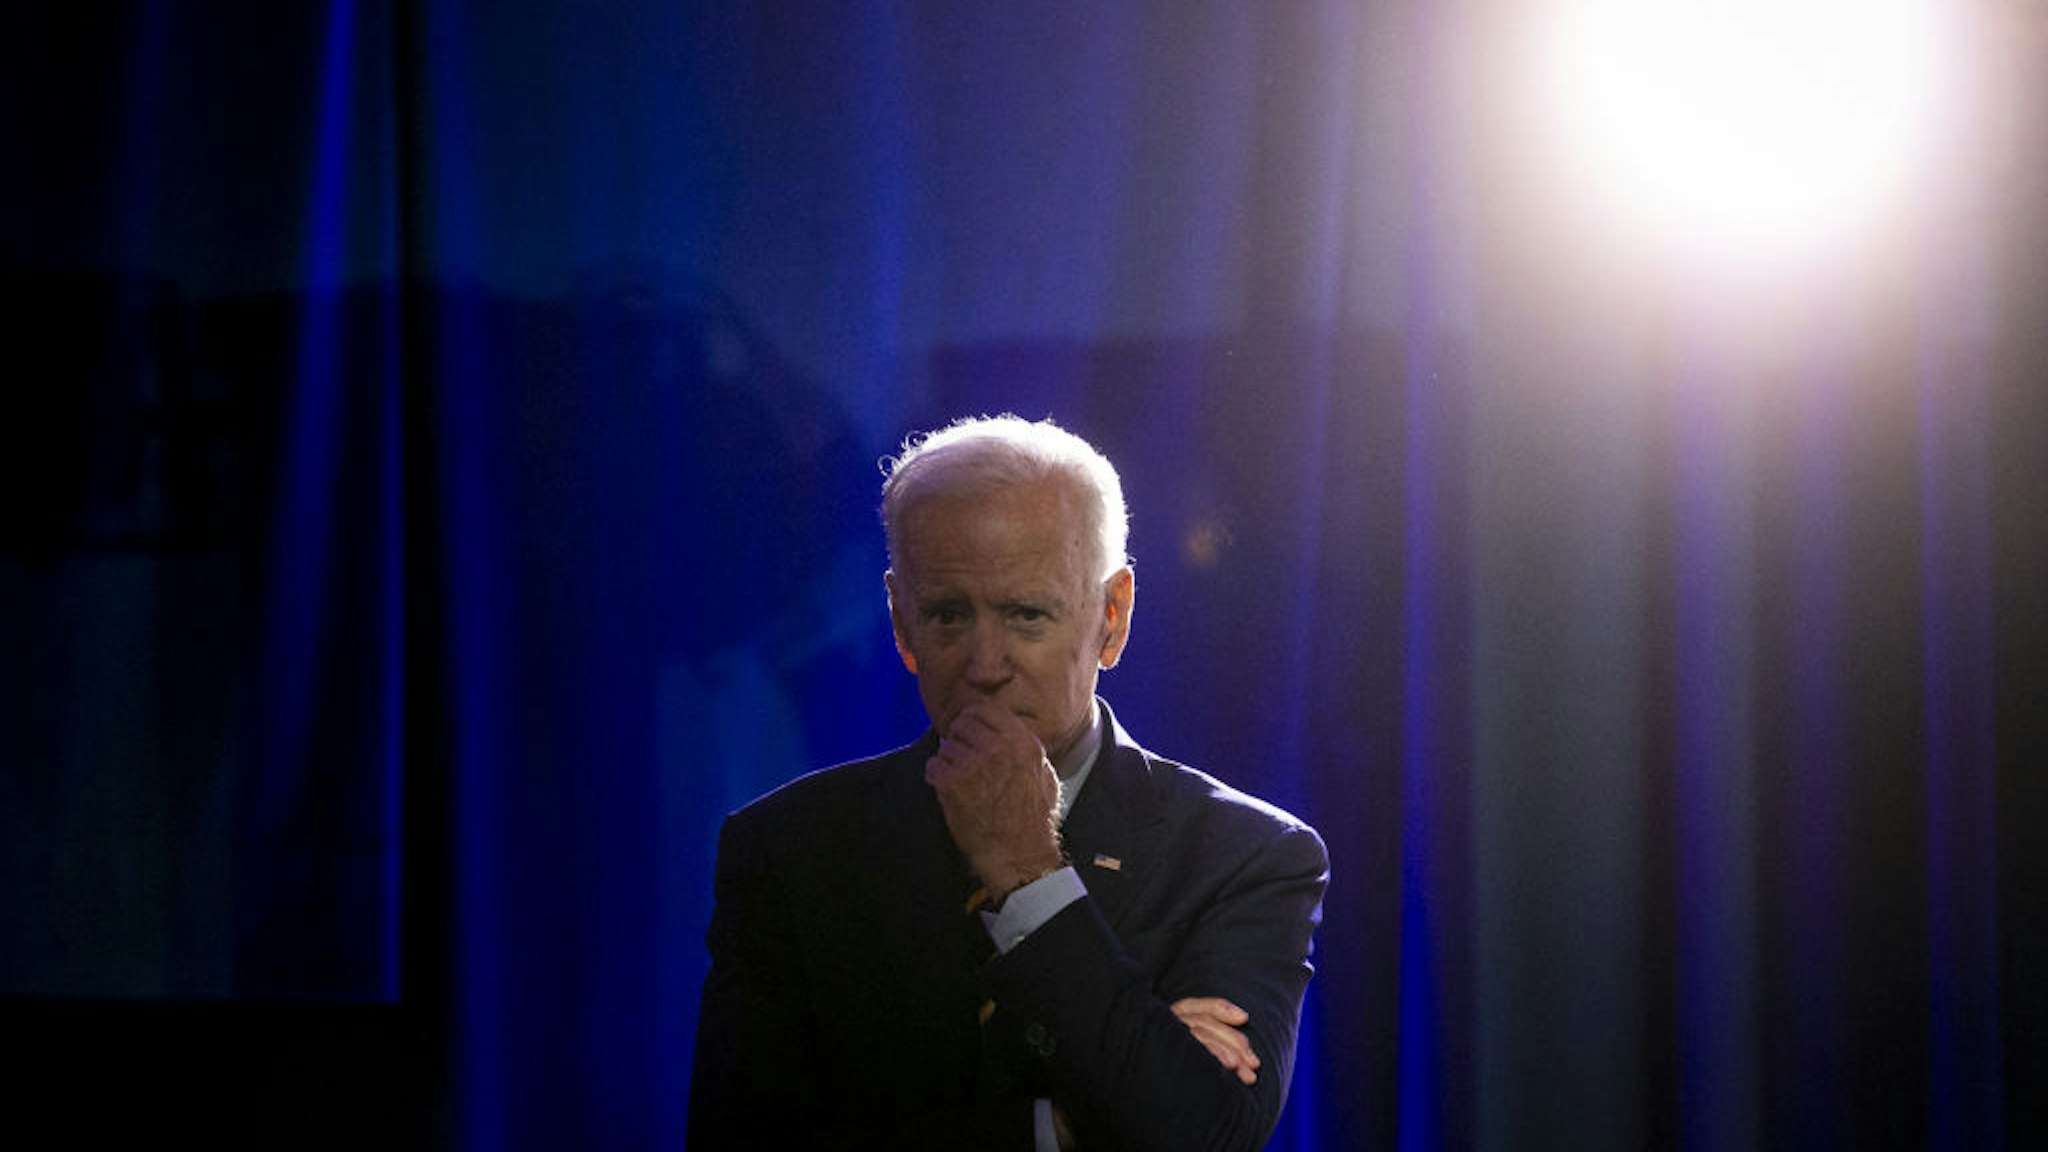 FILE: Former U.S. Vice President Joe Biden, 2020 Democratic presidential candidate, listens during the Planned Parenthood Action Fund (PPAF) We Decide 2020 Election Membership Forum in Columbia, South Carolina, U.S., on Saturday, June 22, 2019. Monday, January 20, 2020, marks the third anniversary of U.S. President Donald Trump's inauguration. Our editors select the best archive images looking back over Trumps term in office. Photographer: Al Drago/Bloomberg via Getty Images